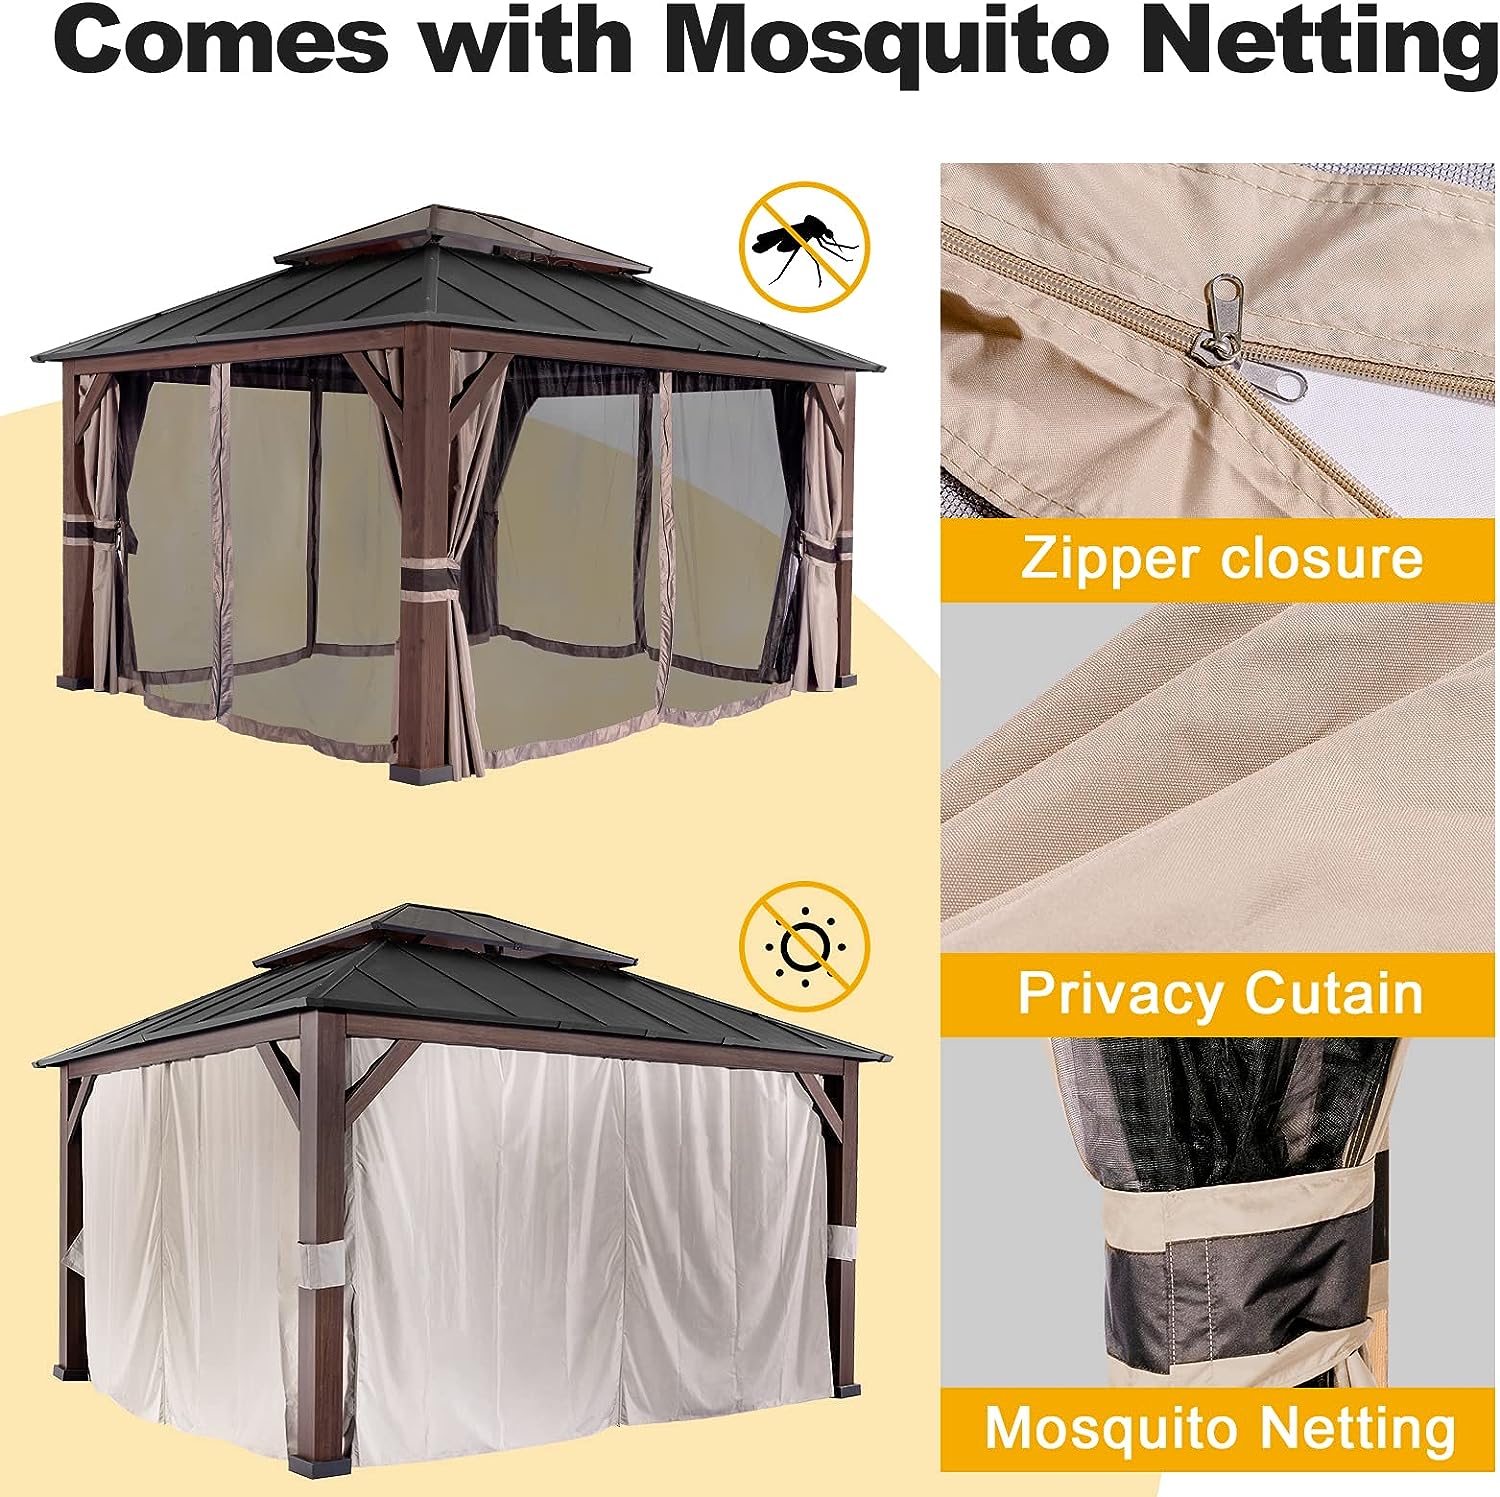 Comes with Mosquito Netting